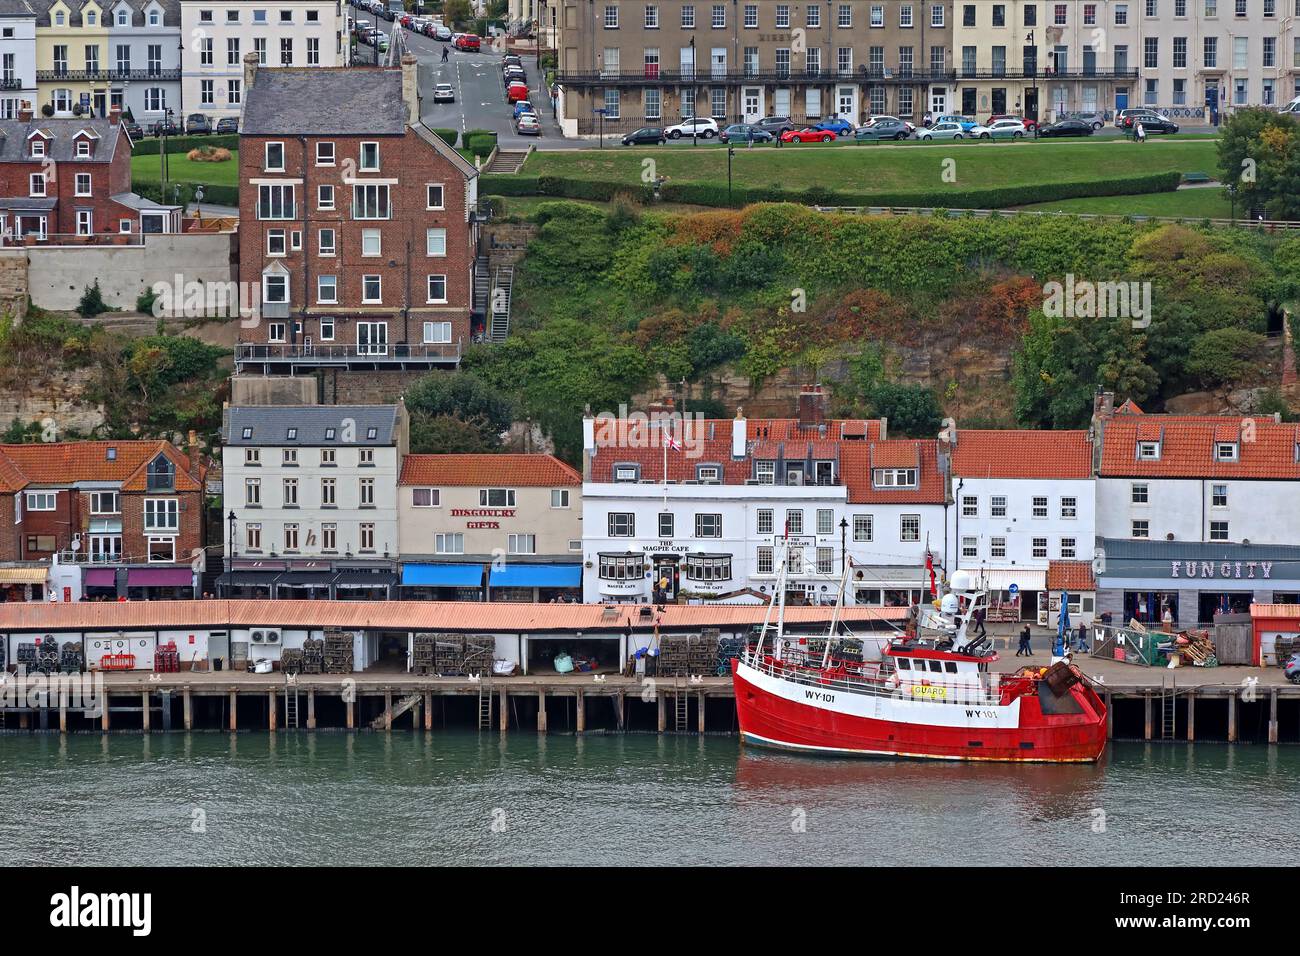 View of West Cliff, Whitby town, harbour and moorings, including a moored red fishing boat, North Yorkshire, England, UK, YO21 3PU Stock Photo